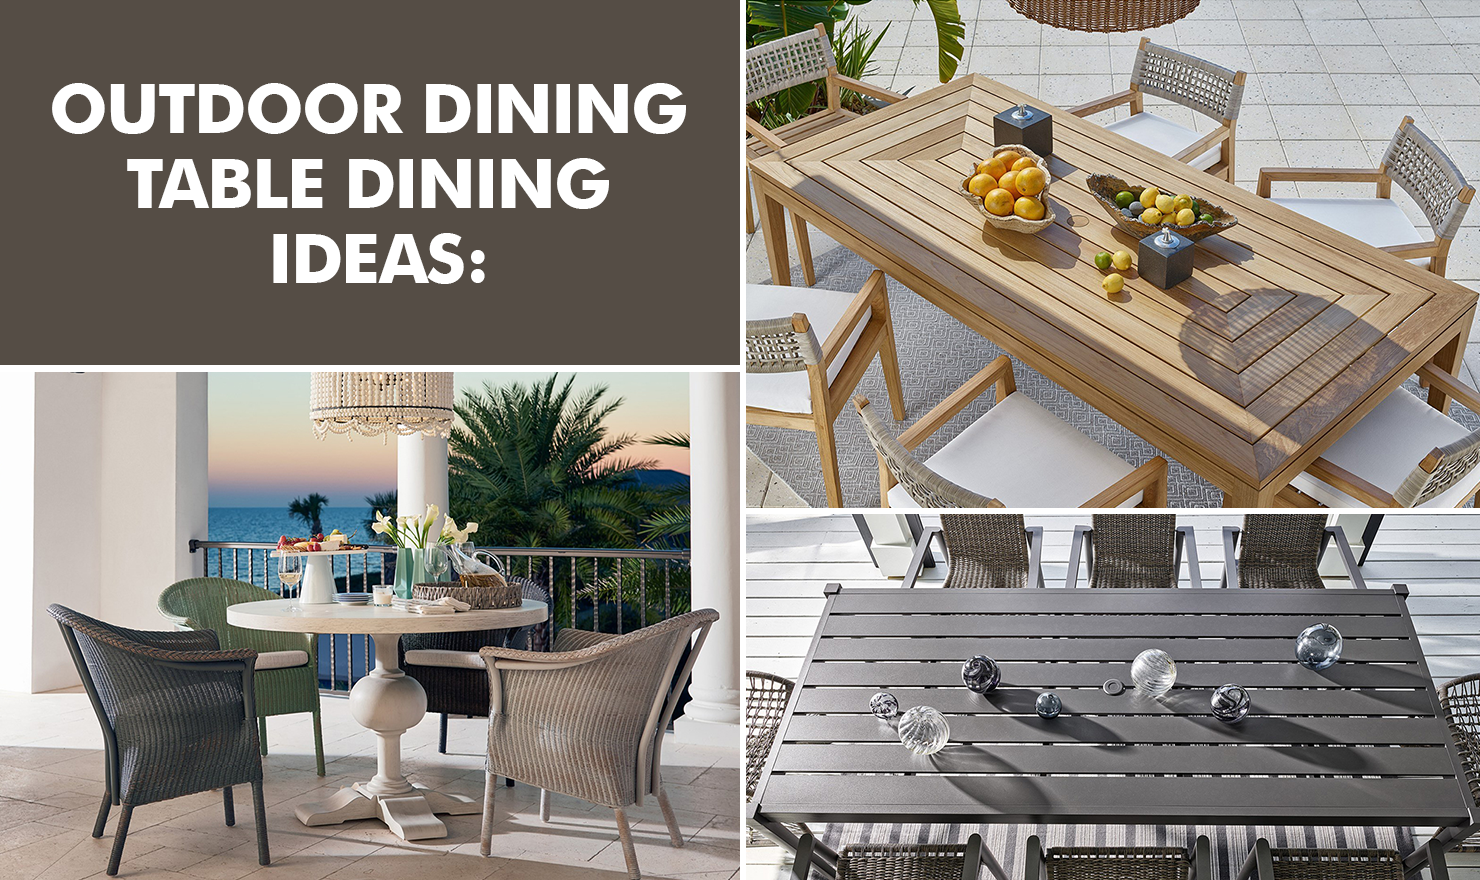 Outdoor dining table dining ideas